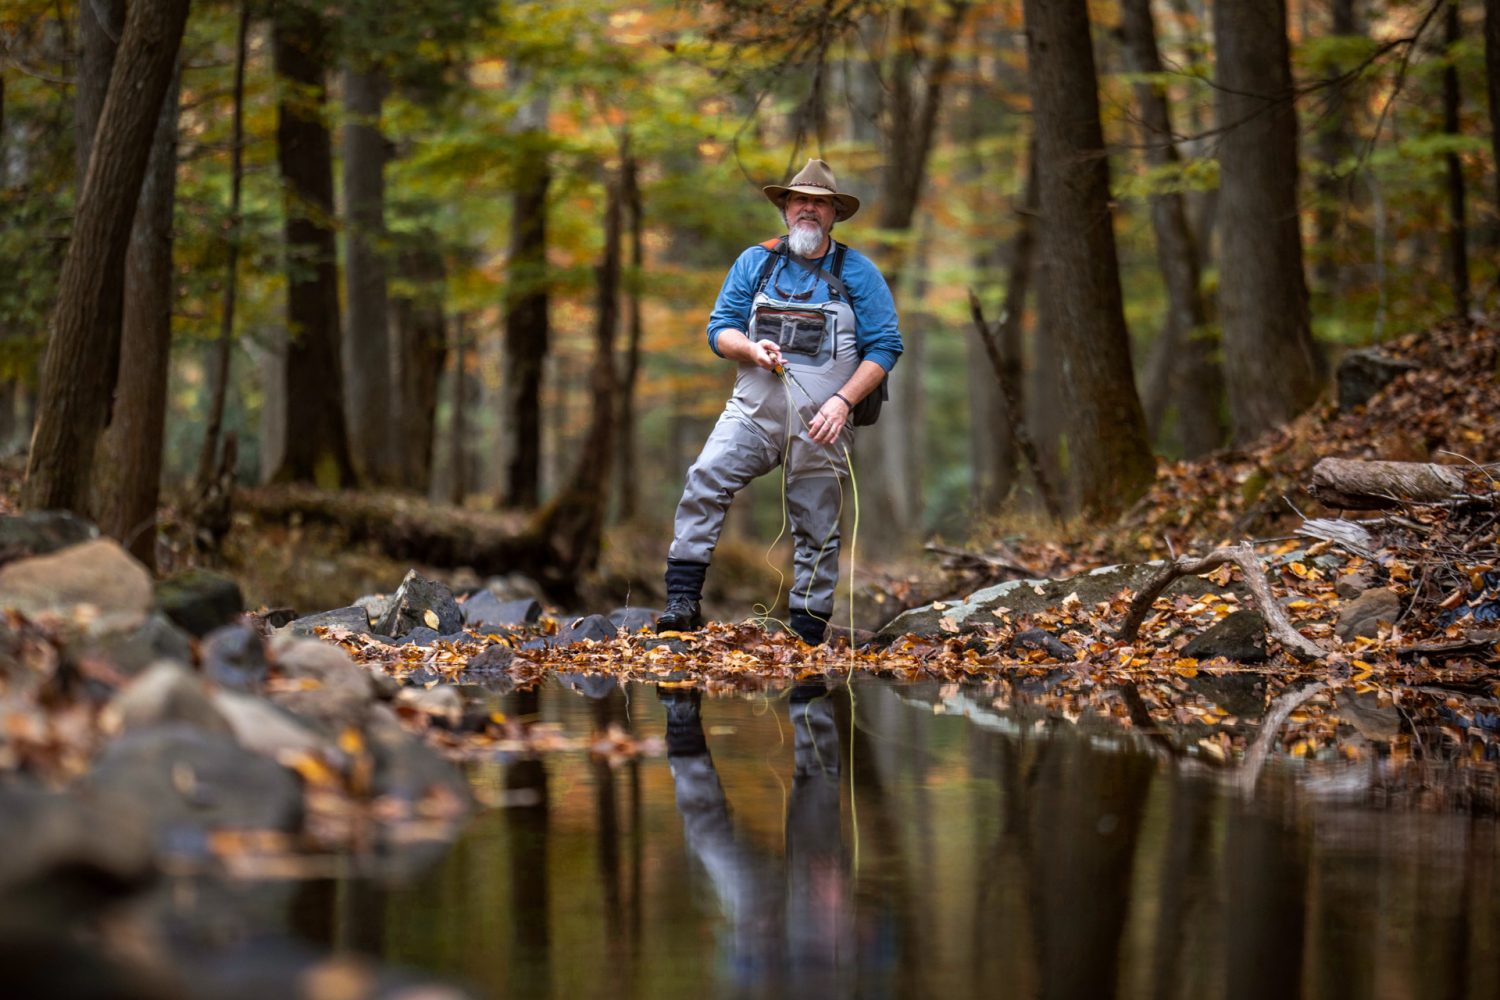 Trout stockings return to West Virginia lakes and streams Oct. 18